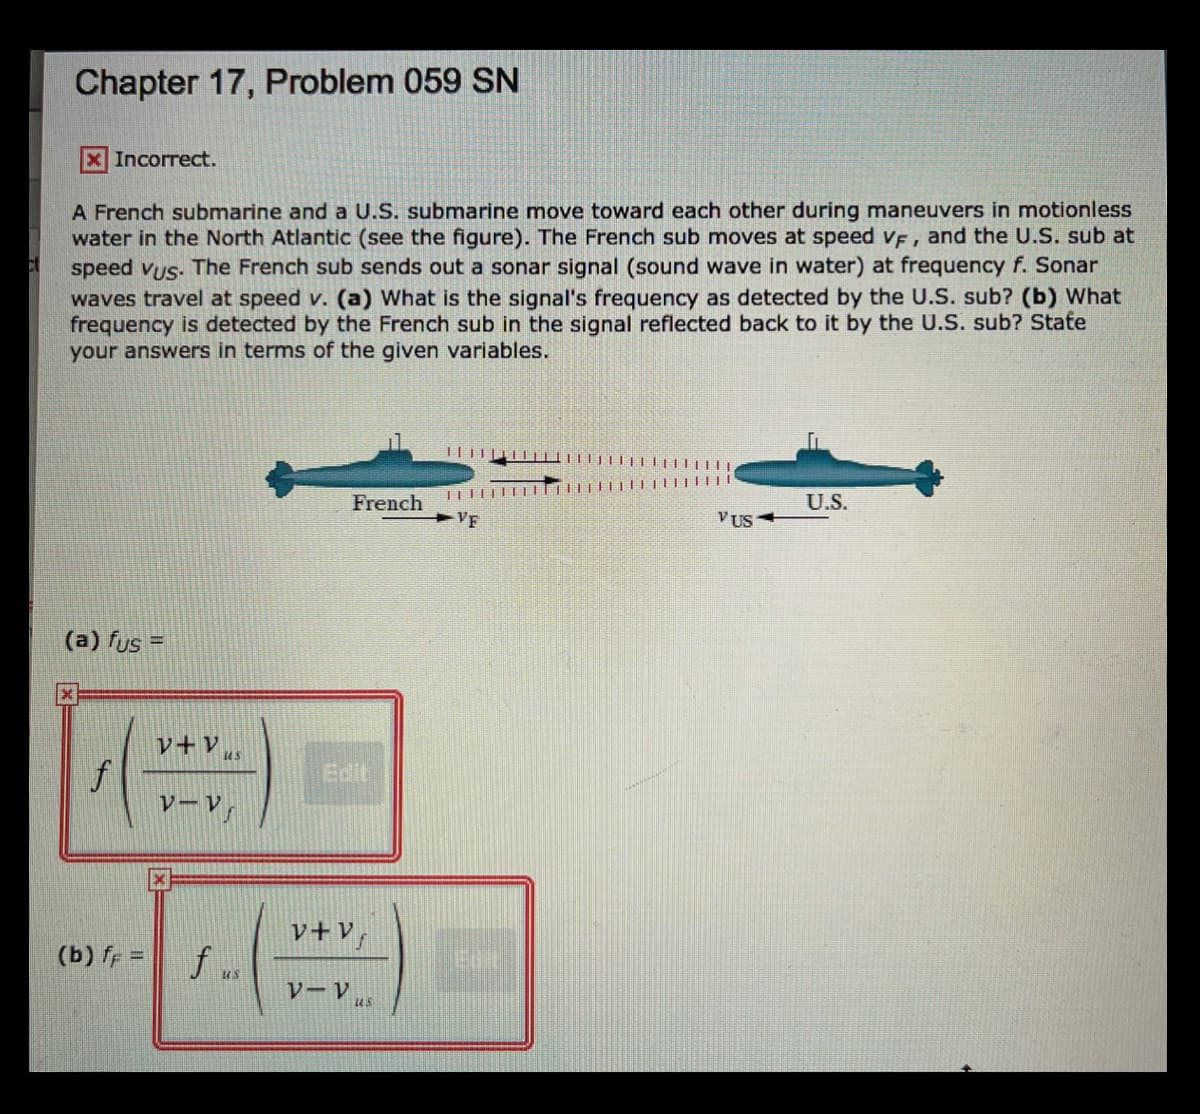 Chapter 17, Problem 059 SN
XIncorrect.
A French submarine and a U.S. submarine move toward each other during maneuvers in motionless
water in the North Atlantic (see the figure). The French sub moves at speed v, and the U.S. sub at
speed vus. The French sub sends out a sonar signal (sound wave in water) at frequency f. Sonar
waves travel at speed v. (a) What is the signal's frequency as detected by the U.S. sub? (b) What
frequency is detected by the French sub in the signal reflected back to it by the U.S. sub? State
your answers in terms of the given variables.
I|||||||||
French
U.S.
VF
VUS
(a) fus =
レ+V
us
Edit
レーV」
レ+V」
(b) ff =
f
us
V-Vus
